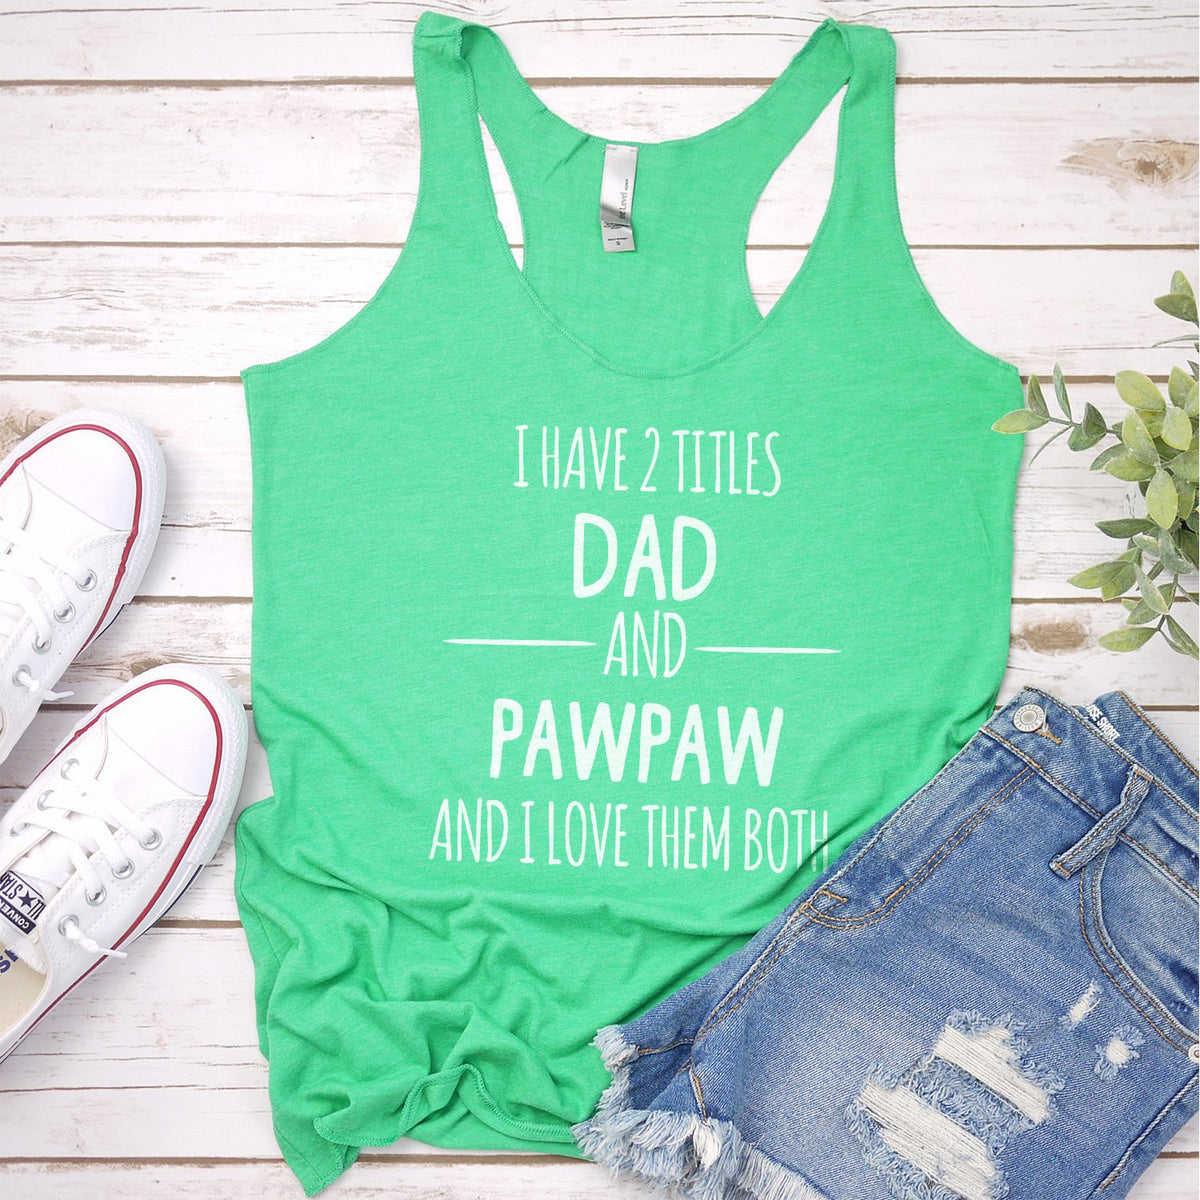 I Have 2 Titles Dad and PawPaw and I Love Them Both - Tank Top Racerback